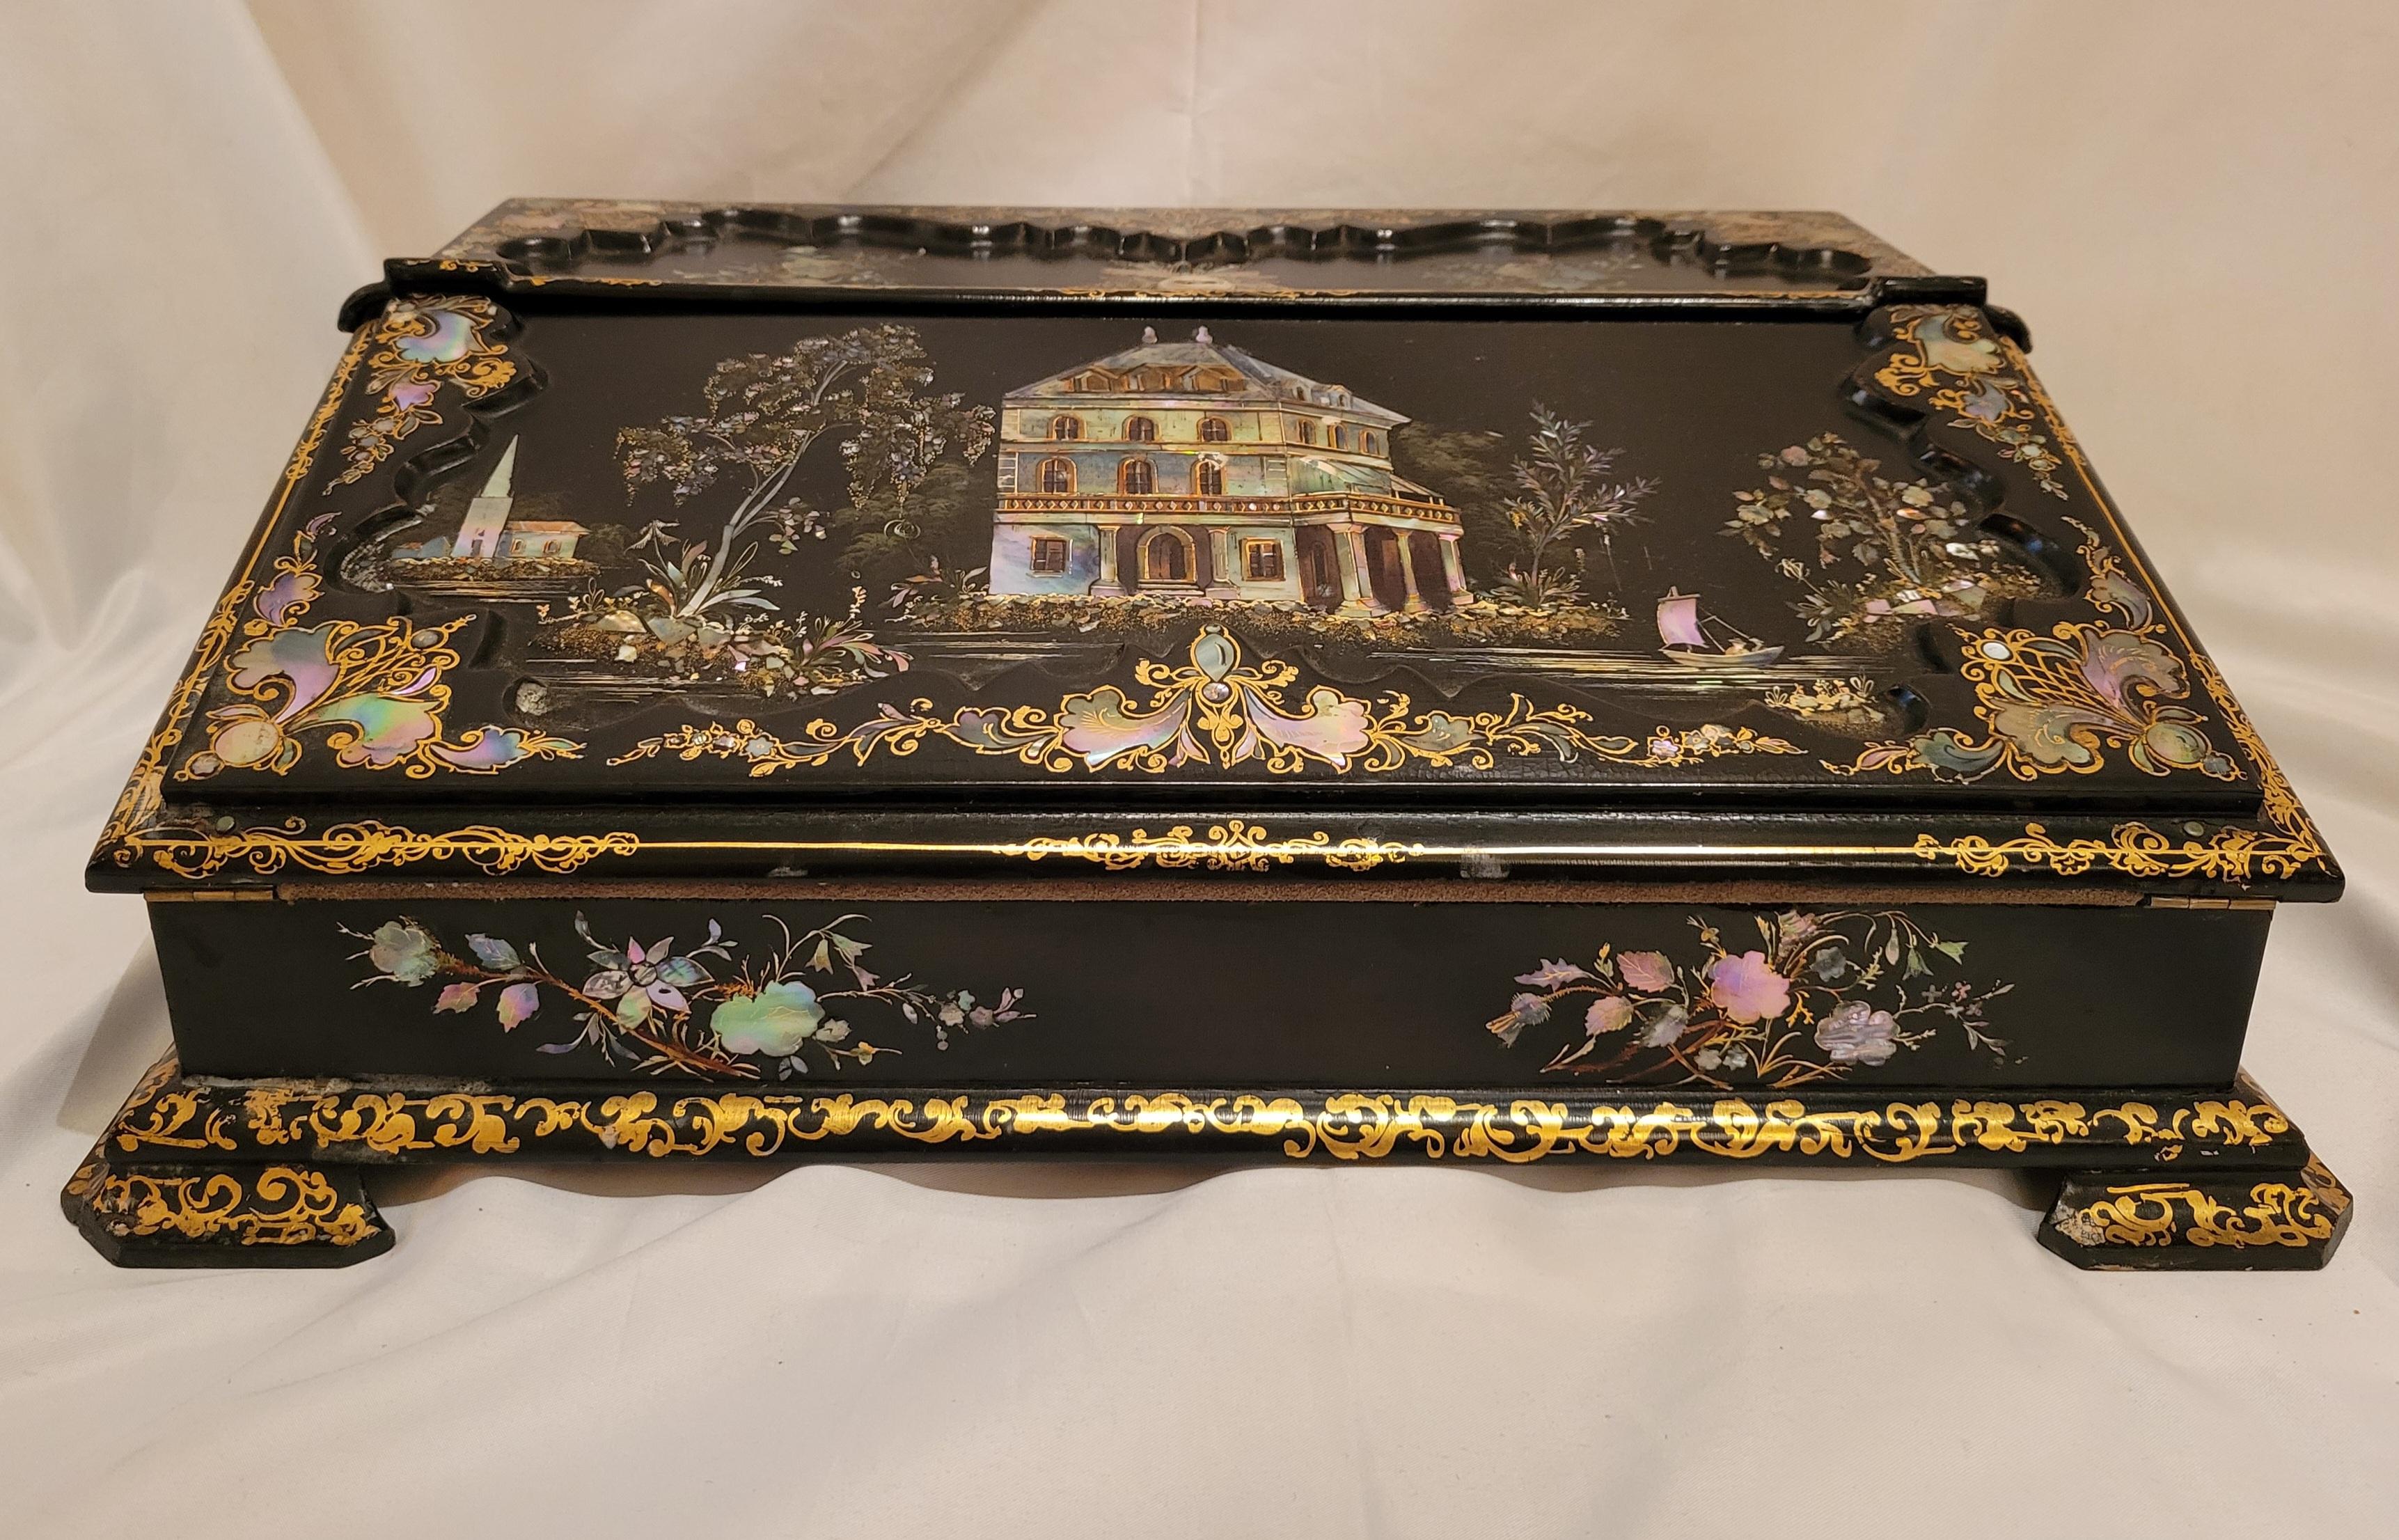 This writing slope (or portable writing desk) is richly decorated with mother-of-pearl and pleasing painted florals. It is a little jewel in and of itself. The laquer is very nice, with a high gloss.